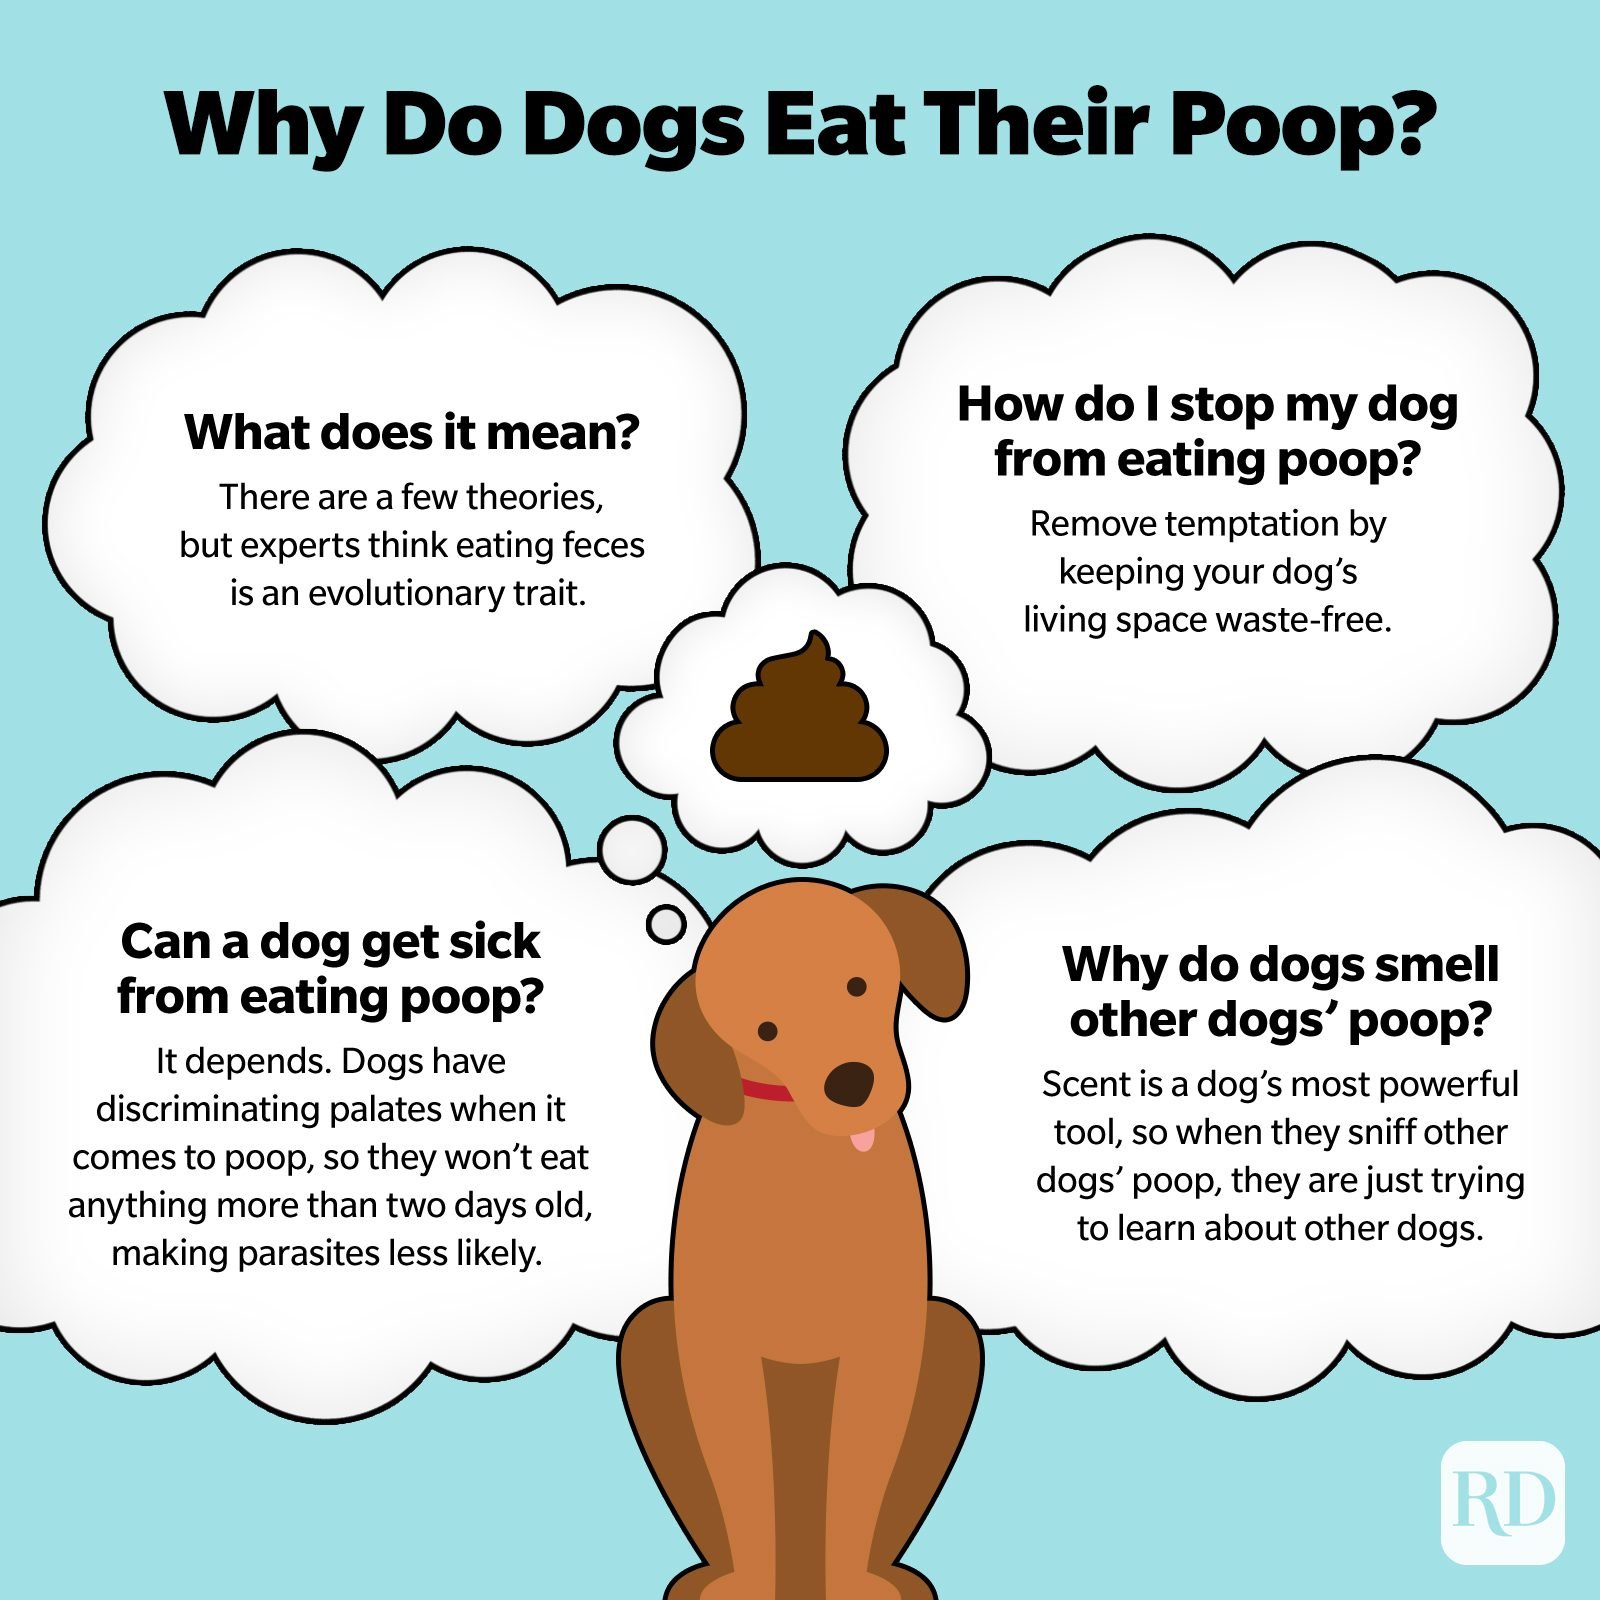 how long after a dog eats should they poop